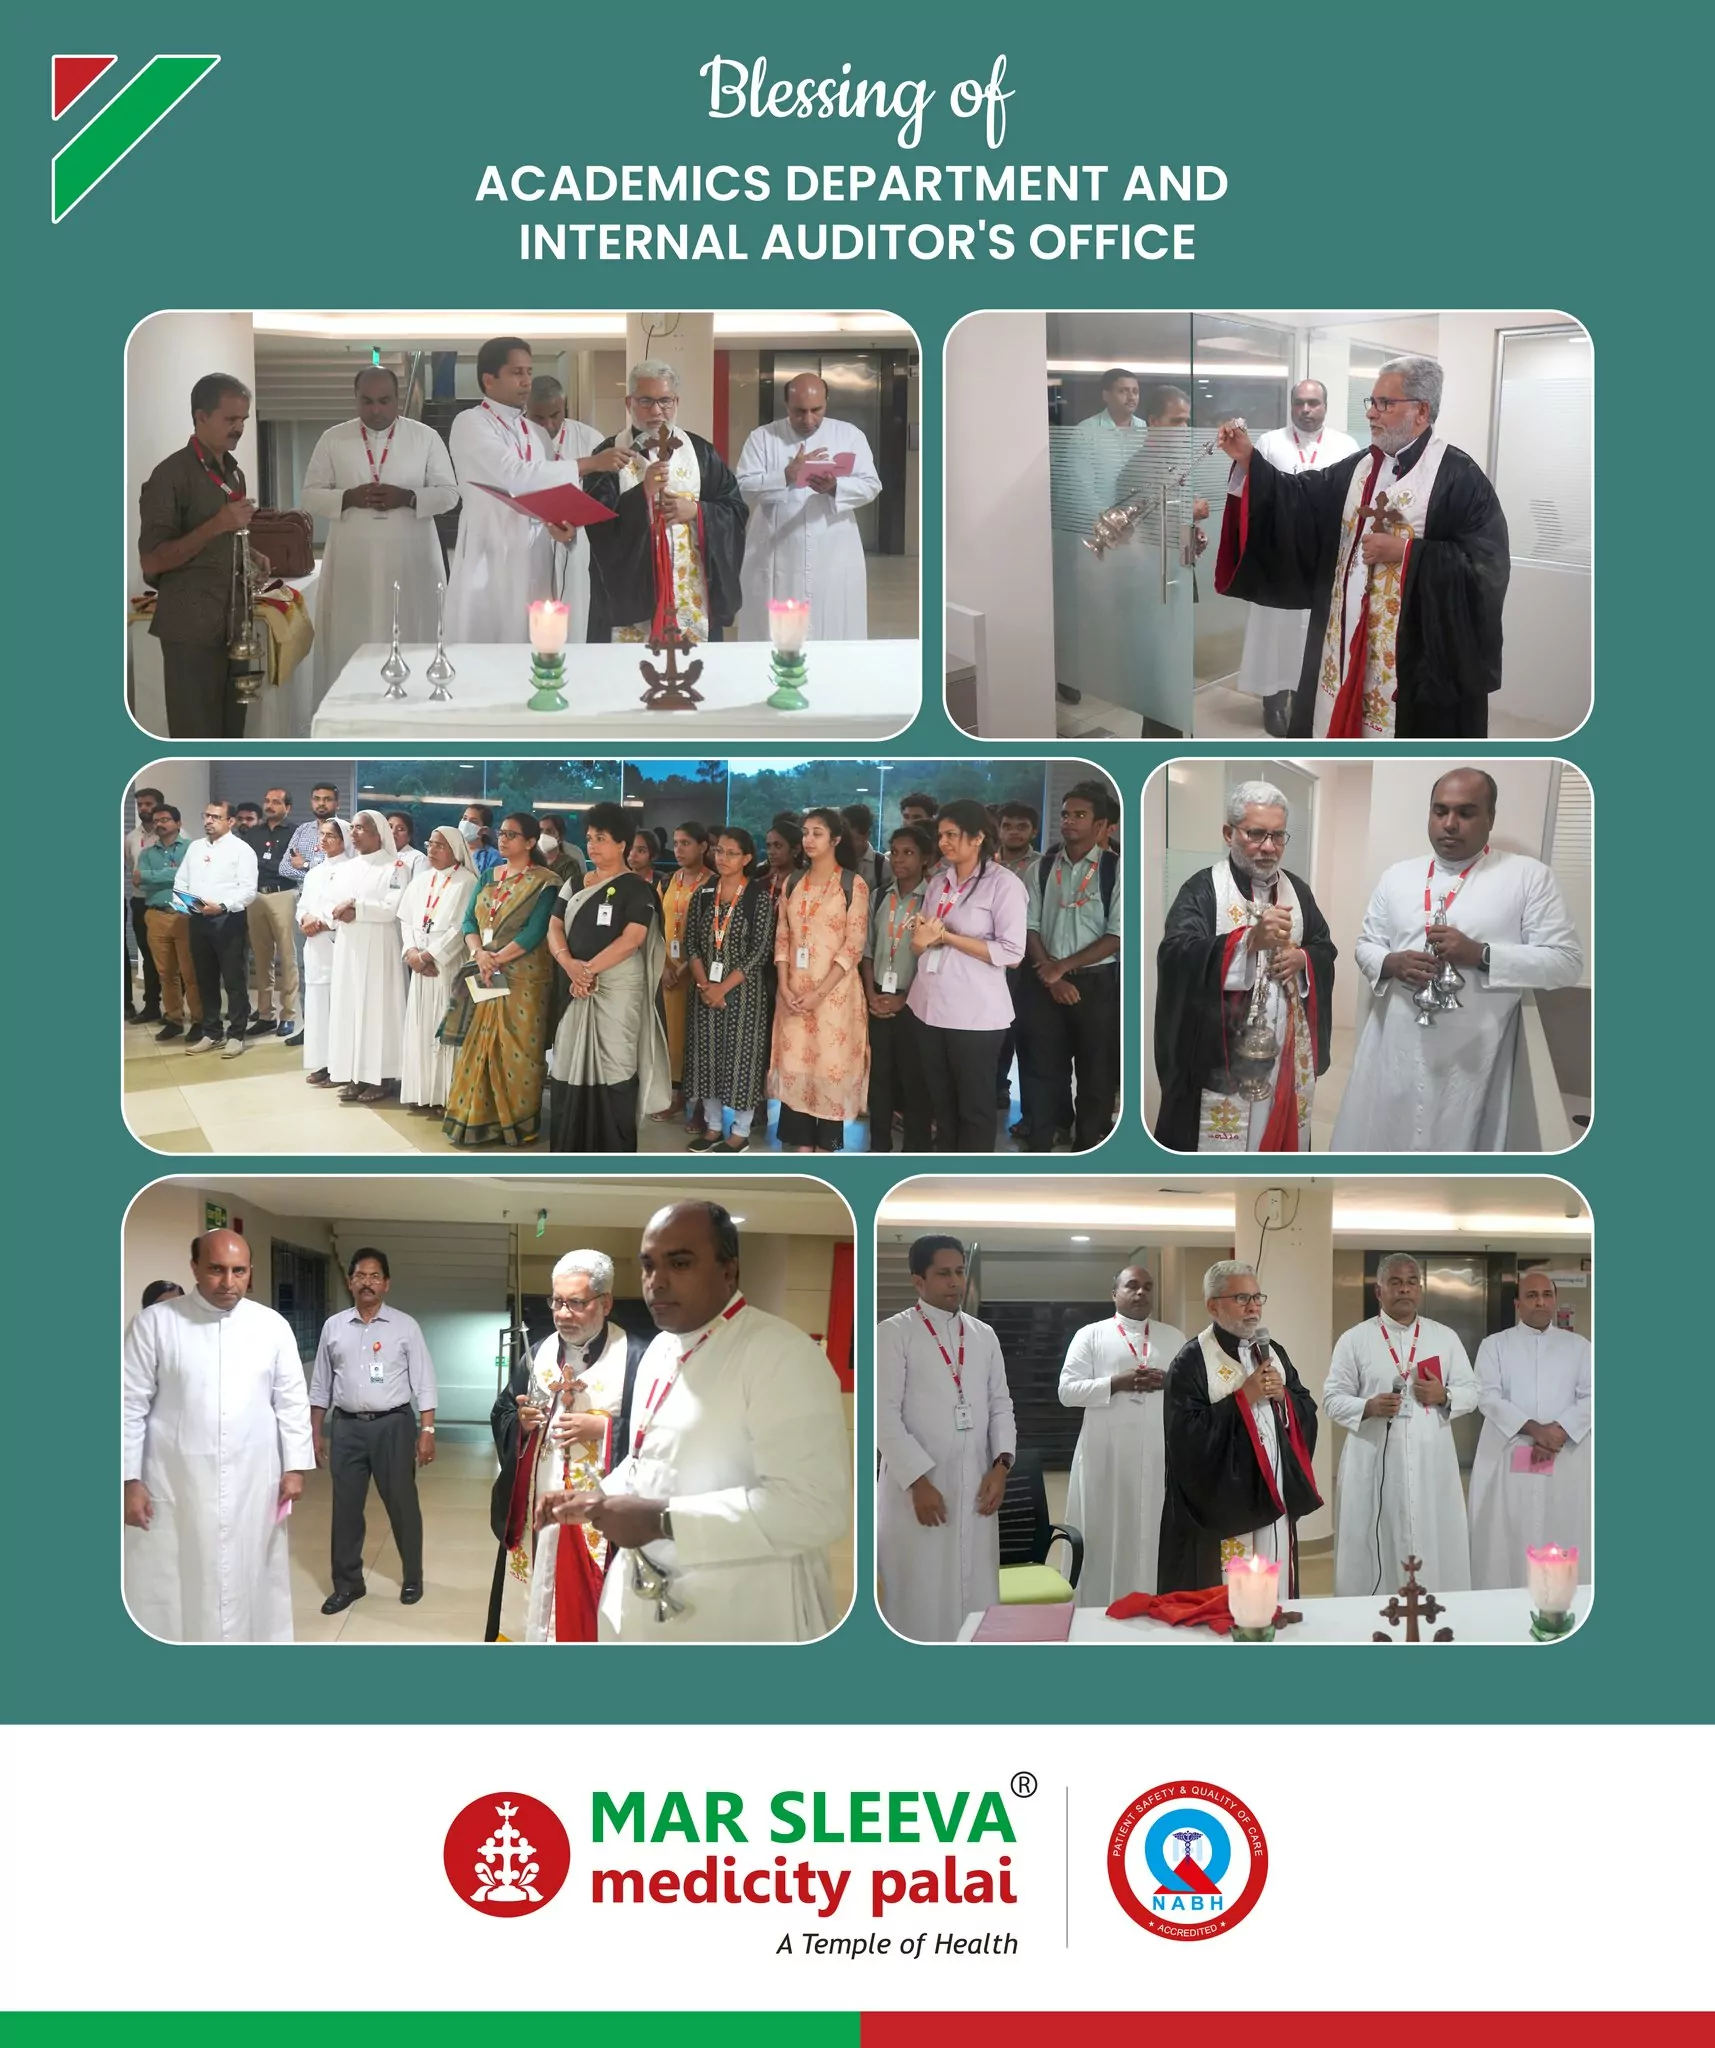 Blessing of Academics Department and Internal Auditor's Office.